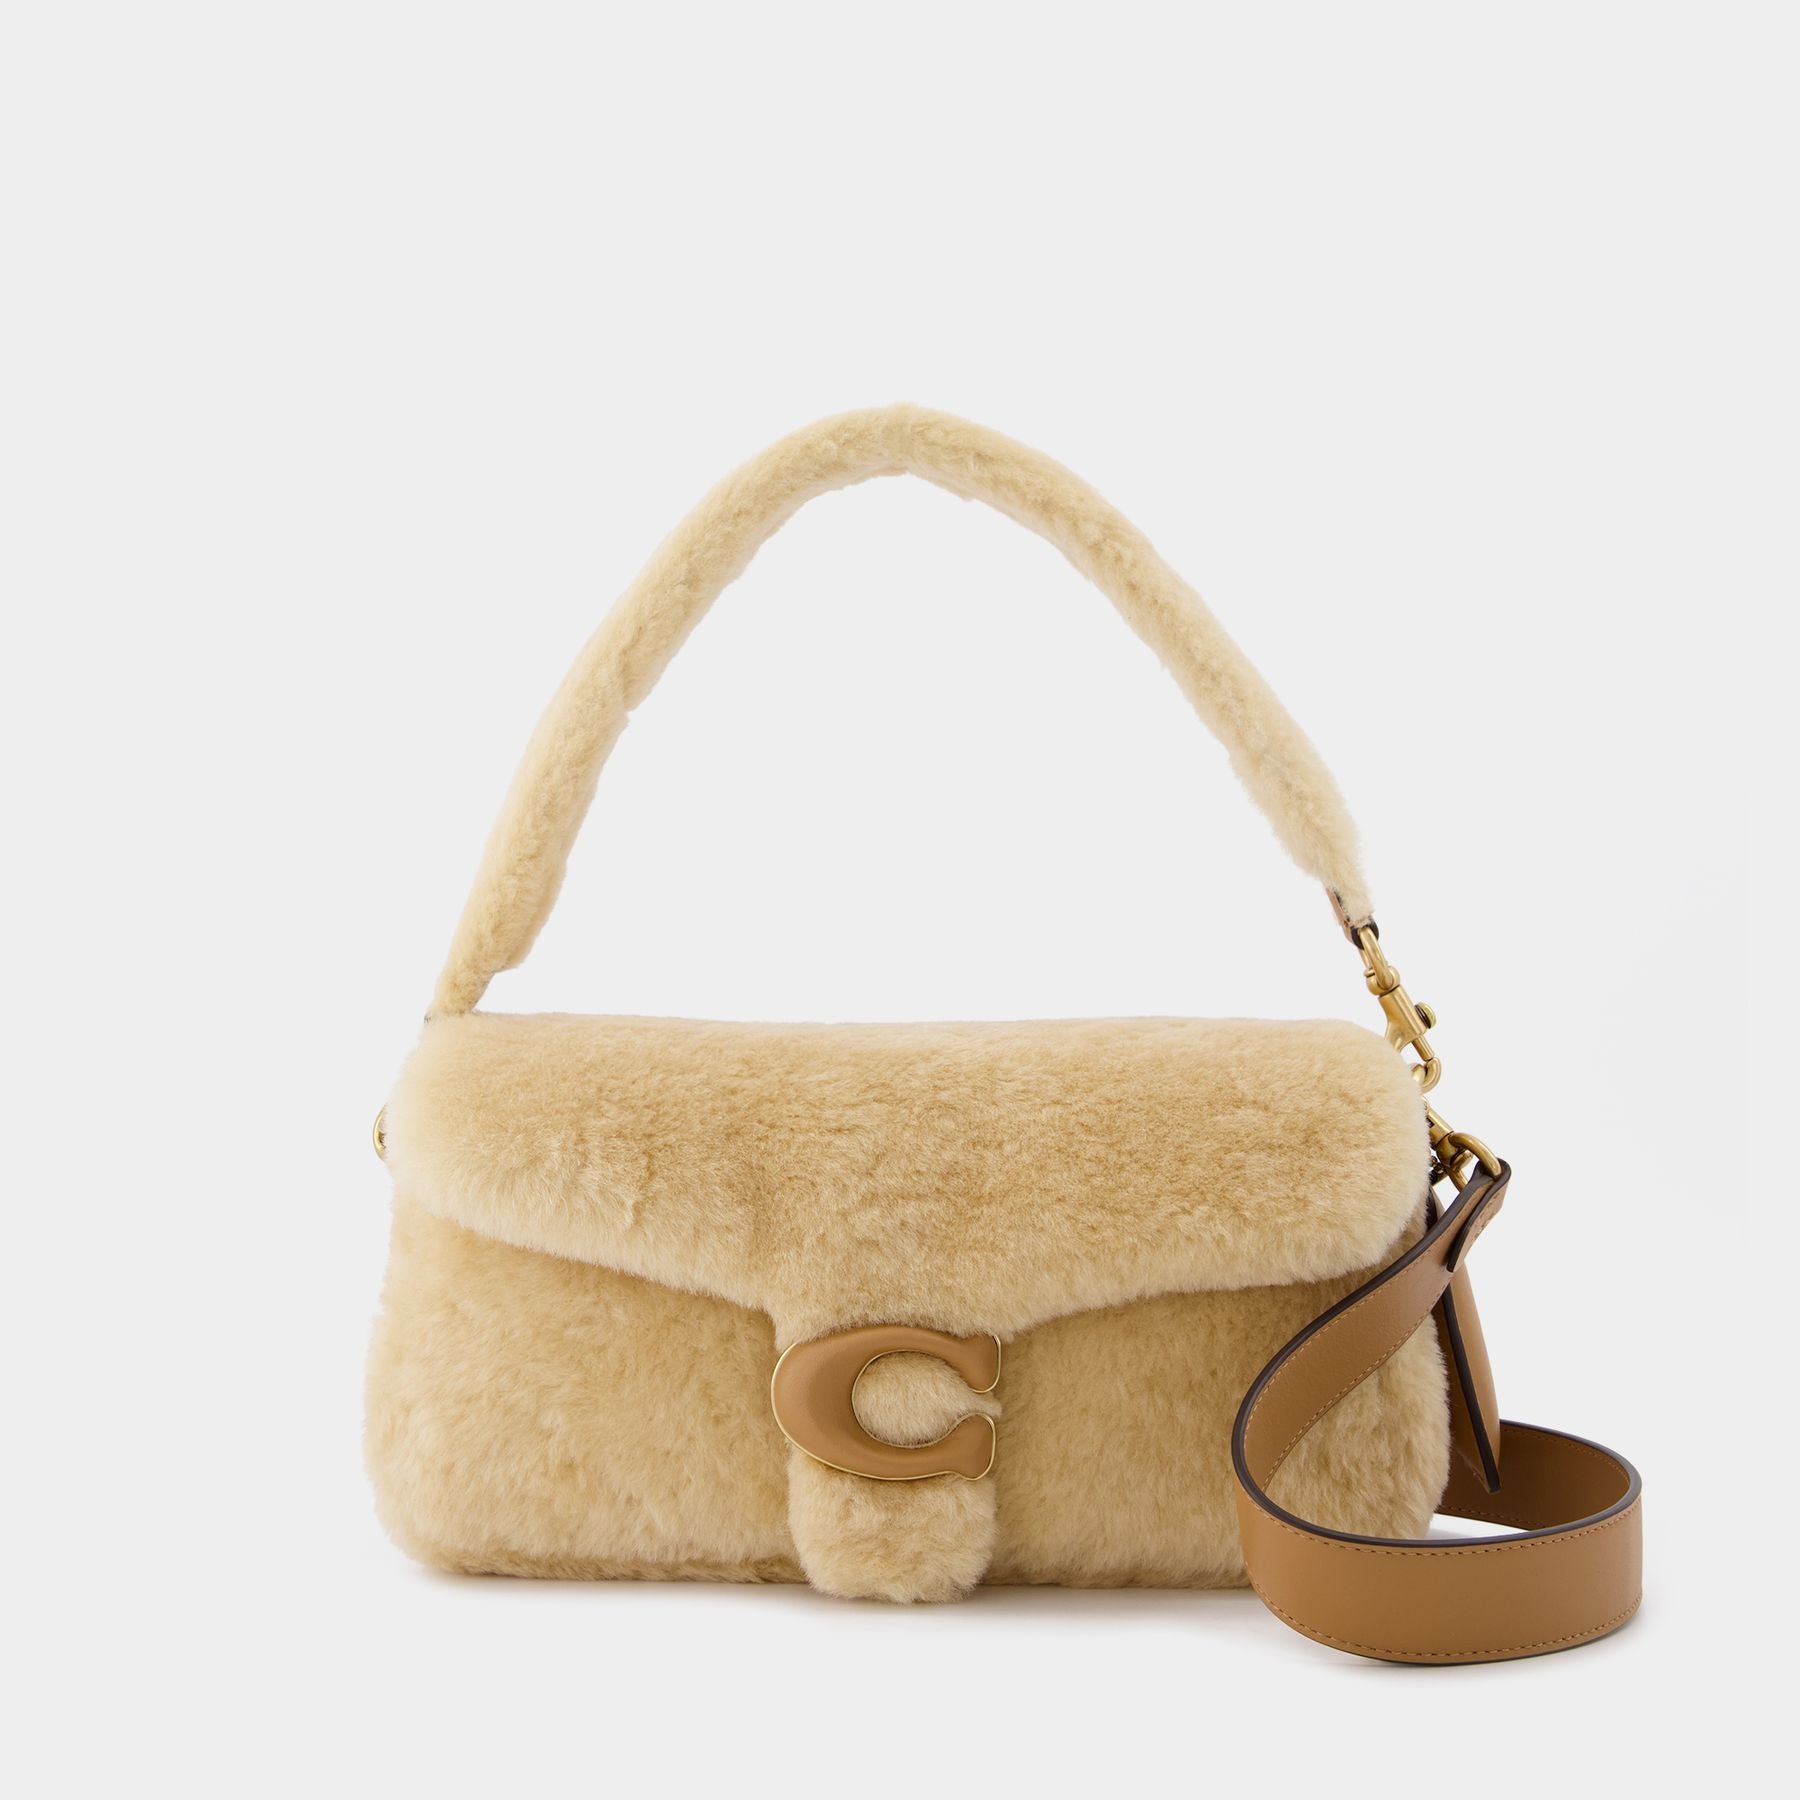 Coach Tabby Pillow Leather Shoulder Bag